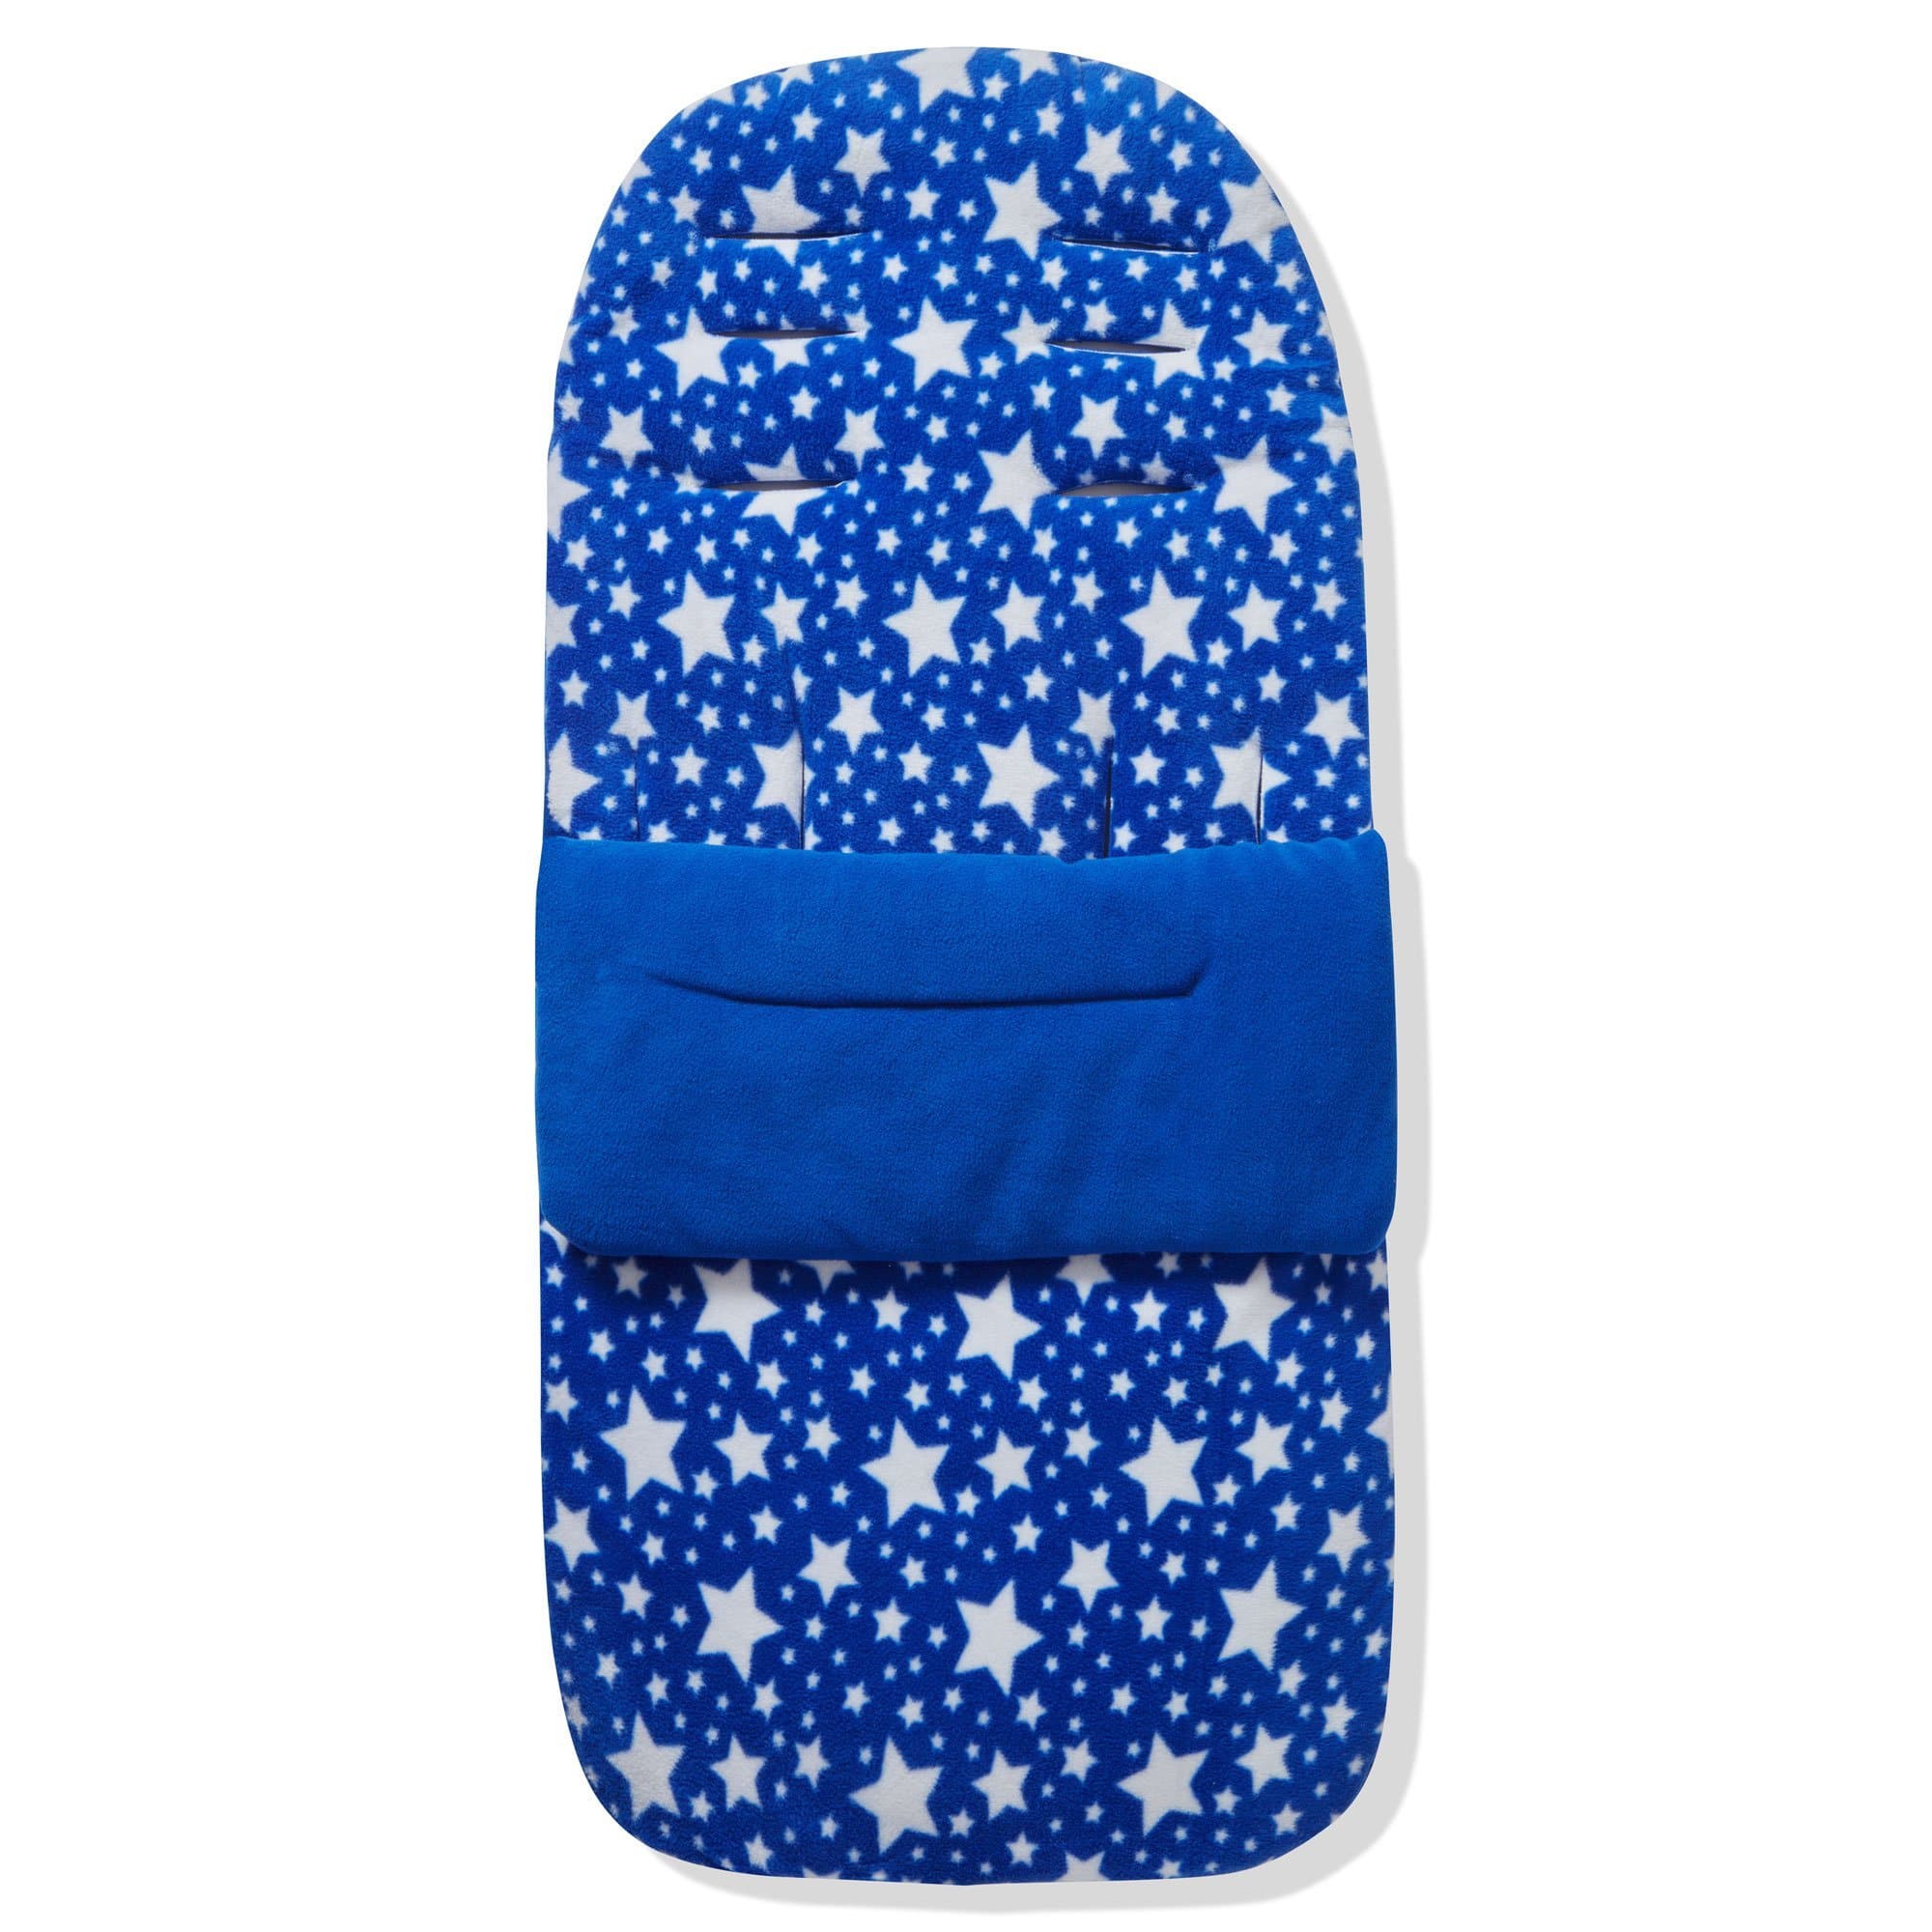 Fleece Footmuff / Cosy Toes Compatible with Zeta - Blue Star / Fits All Models | For Your Little One